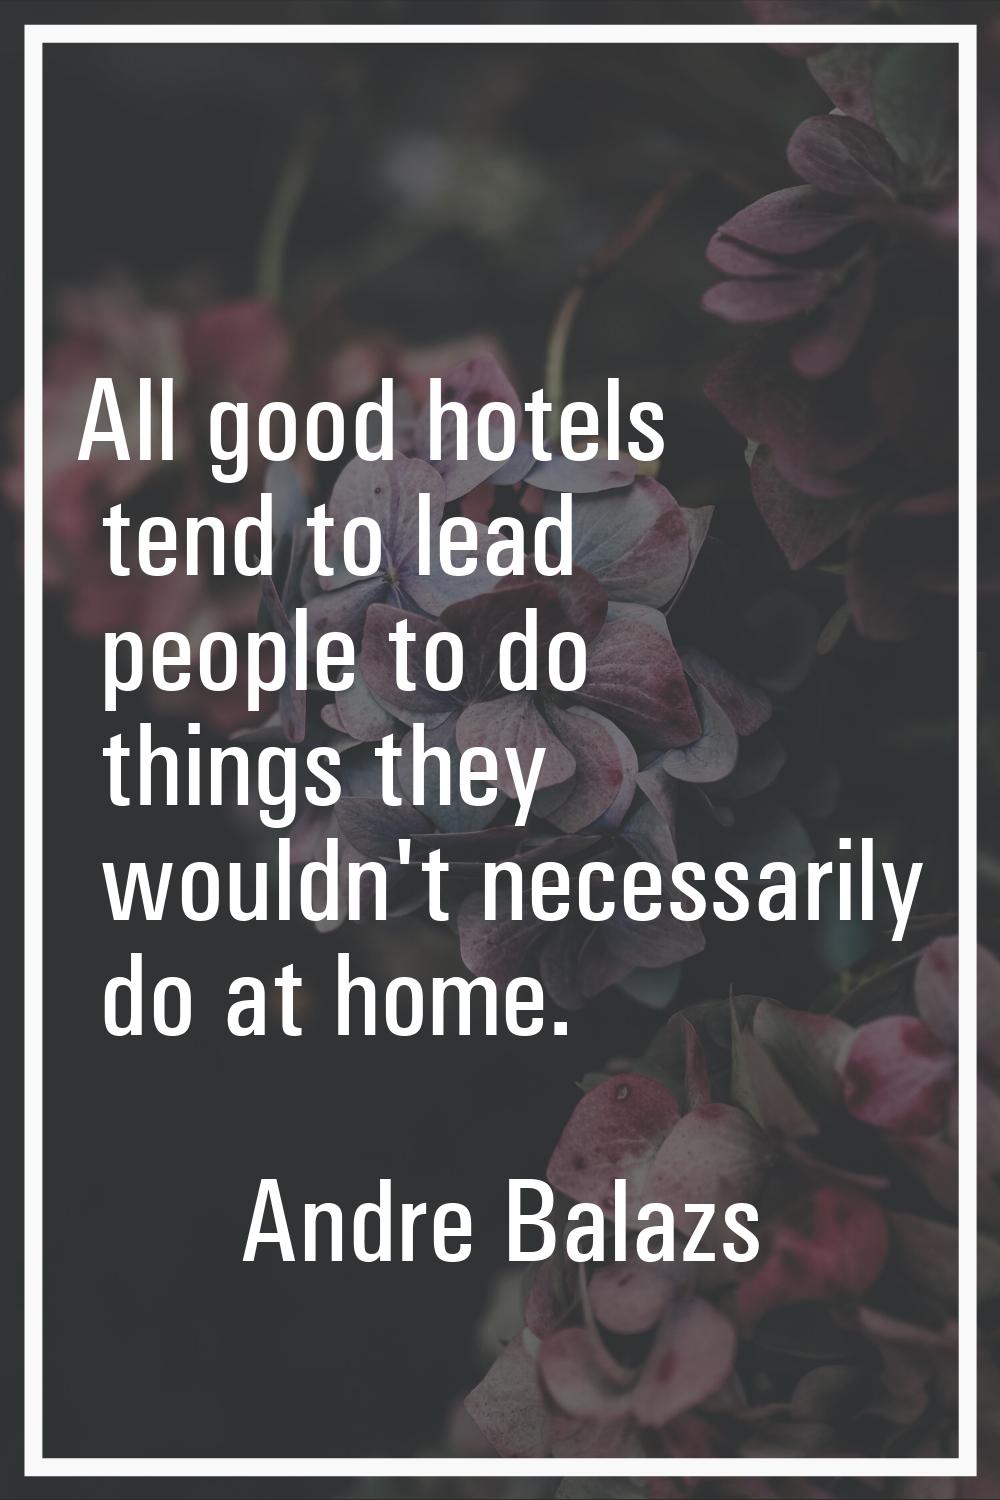 All good hotels tend to lead people to do things they wouldn't necessarily do at home.